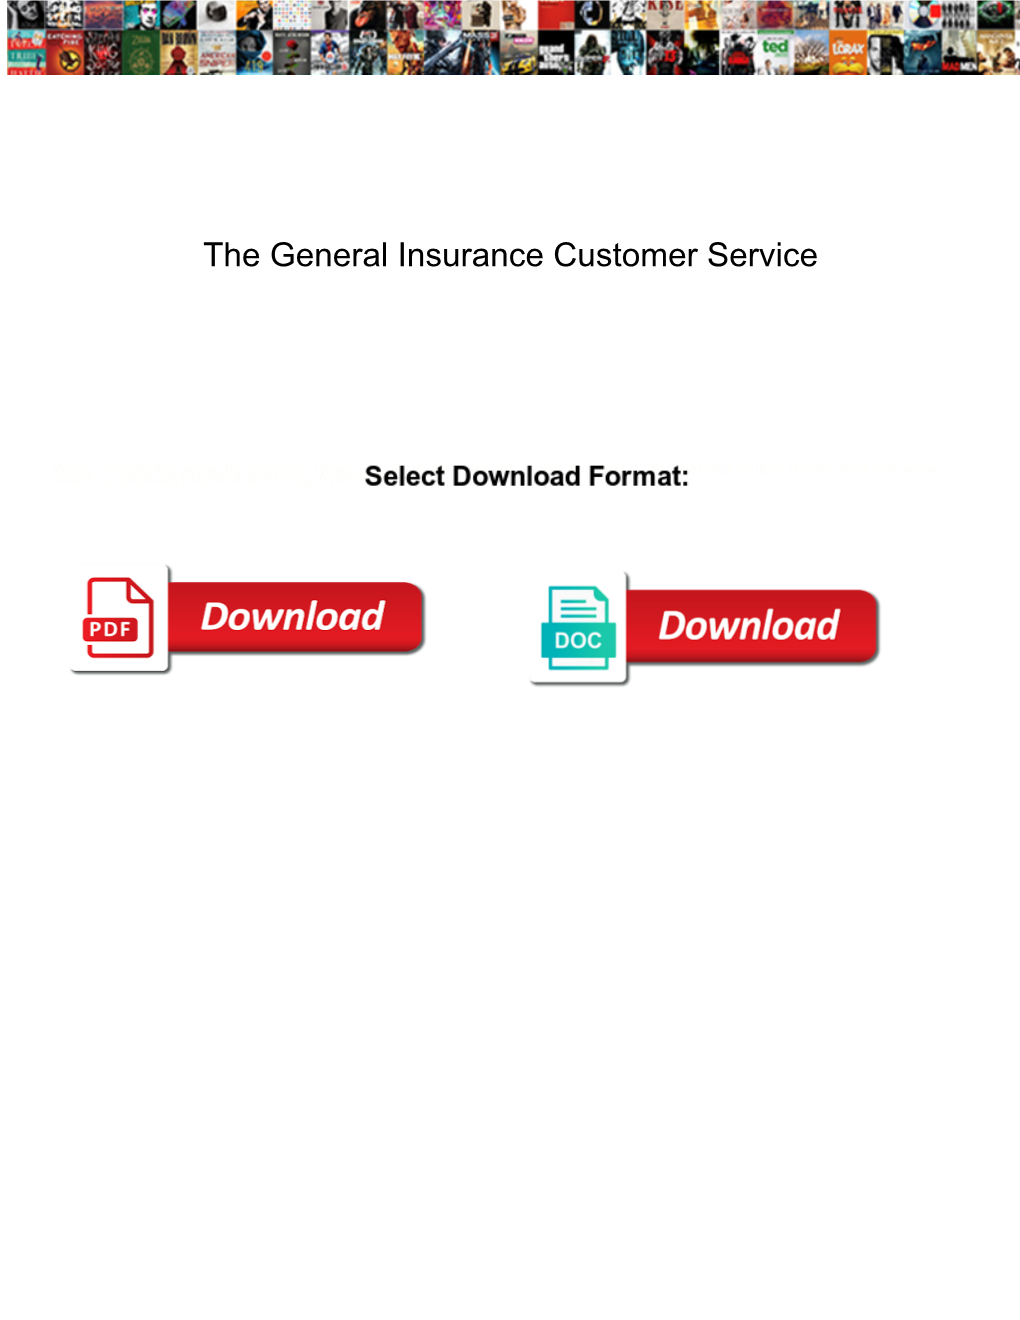 The General Insurance Customer Service